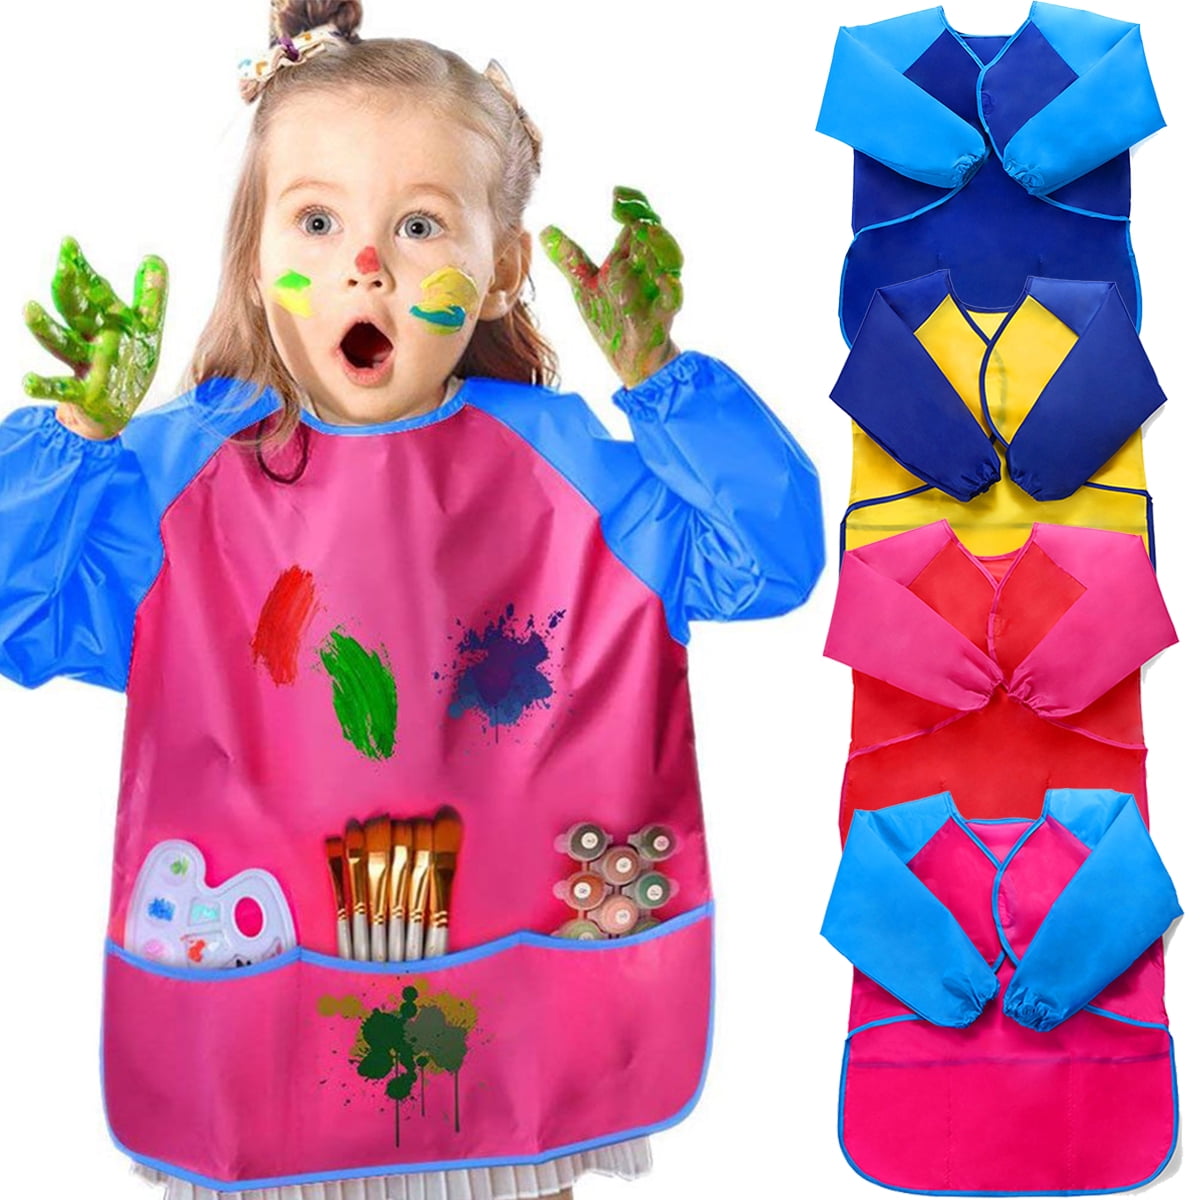 AnuirheiH Kids Art Smock Kids Waterproof Painting Apron Children's Artist  Apron with Long Sleeve and 3 Pockets for Aged 2-6 Year Old Boys Girls 